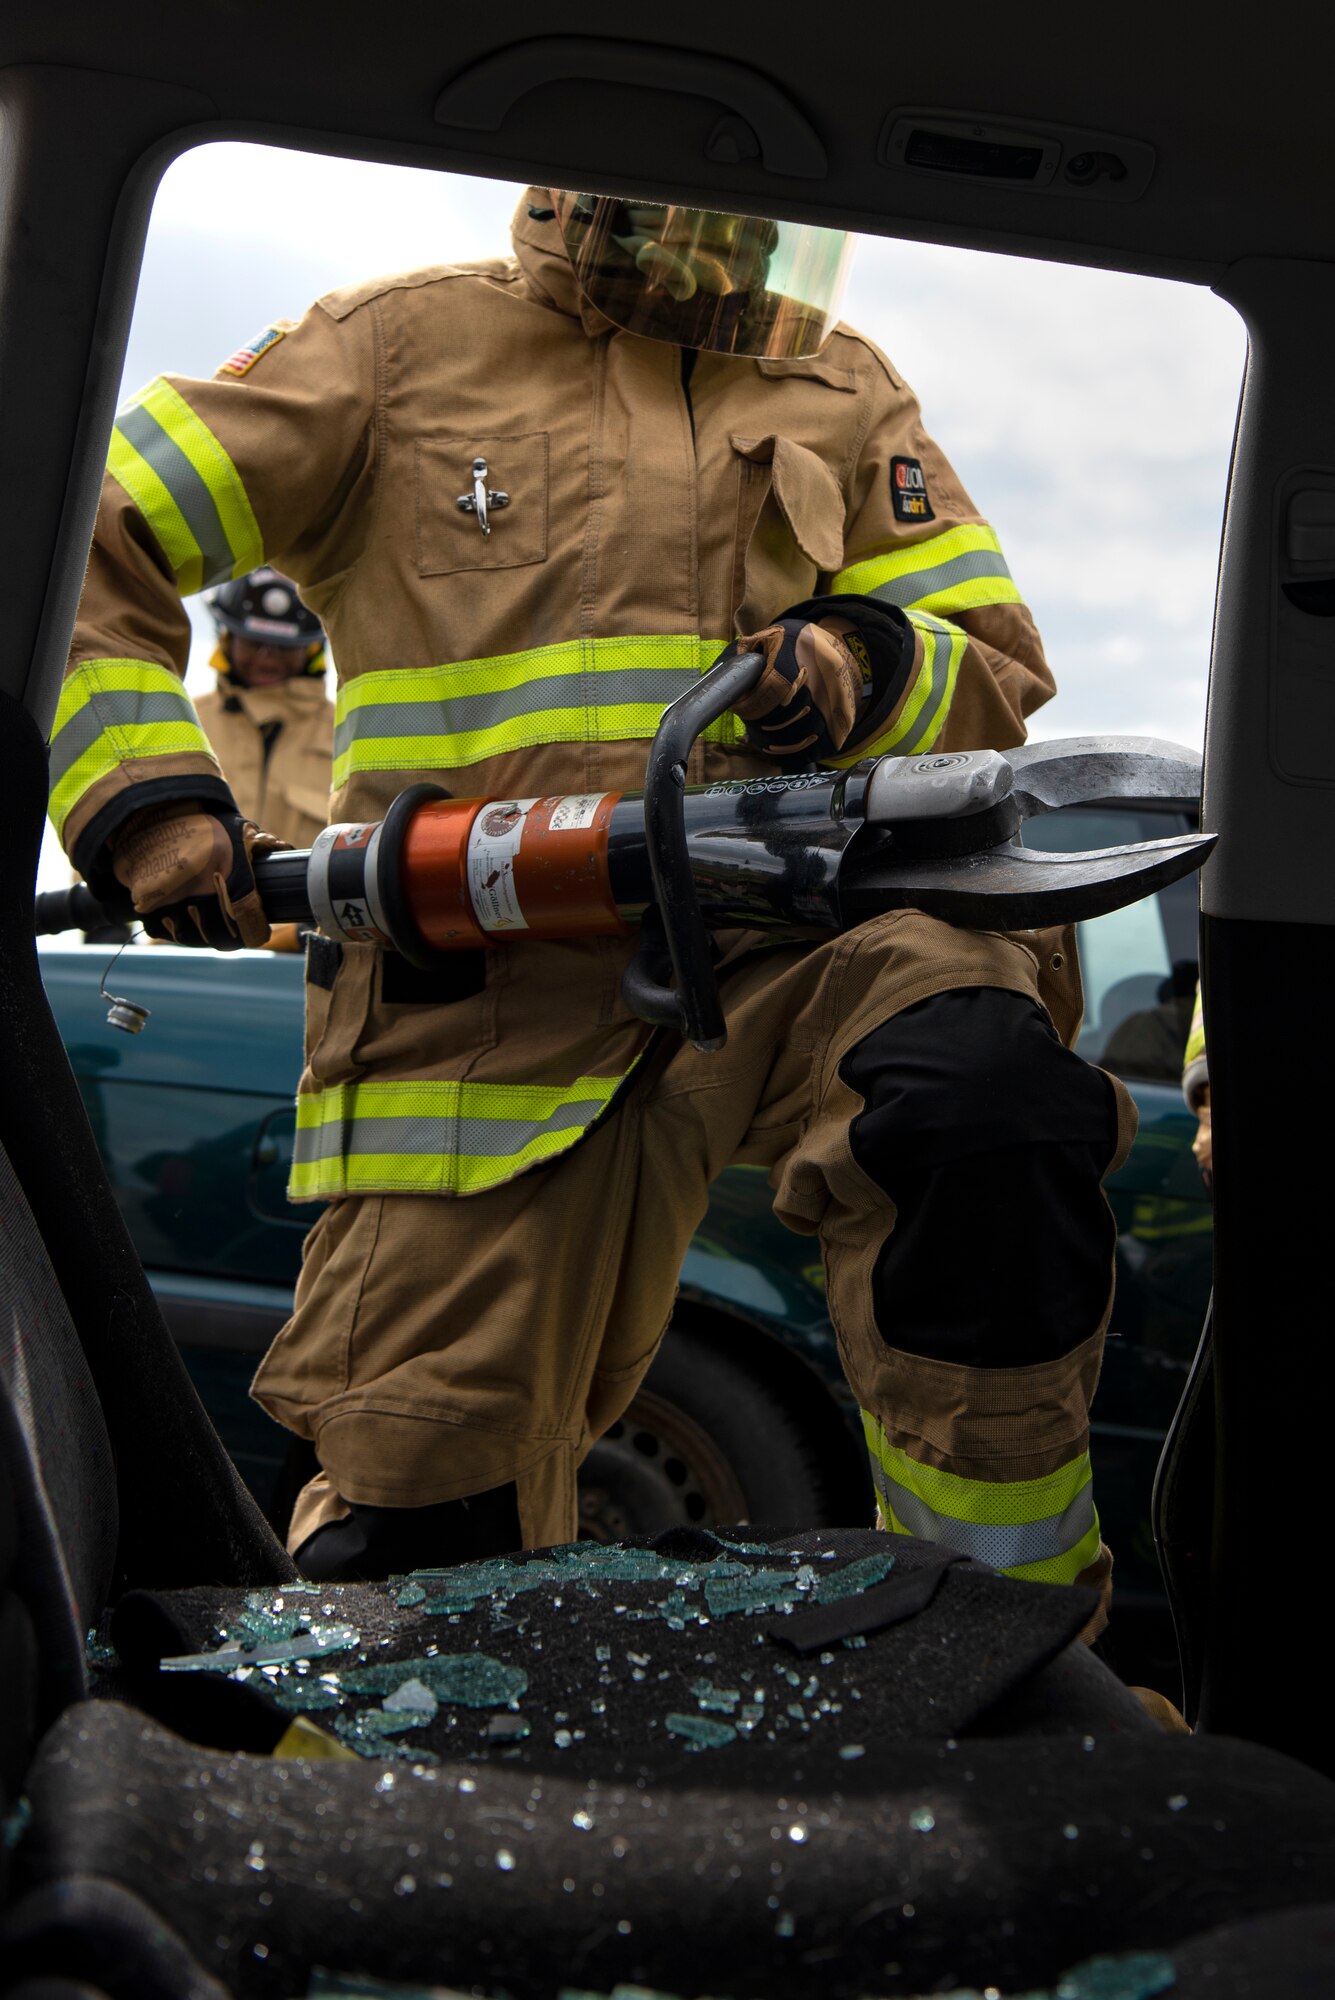 Omar Moylan, a senior at Spangdahlem High School, uses high-pressure hydraulic equipment to cut through posts on a car at Spangdahlem Air Base, Germany, March 26, 2019. Moylan participated in vehicle extrication training with the 52nd Civil Engineer Squadron Fire Department to learn how to quickly remove a person under medical distress from a car. (U.S. Air Force photo by Airman 1st Class Valerie Seelye)